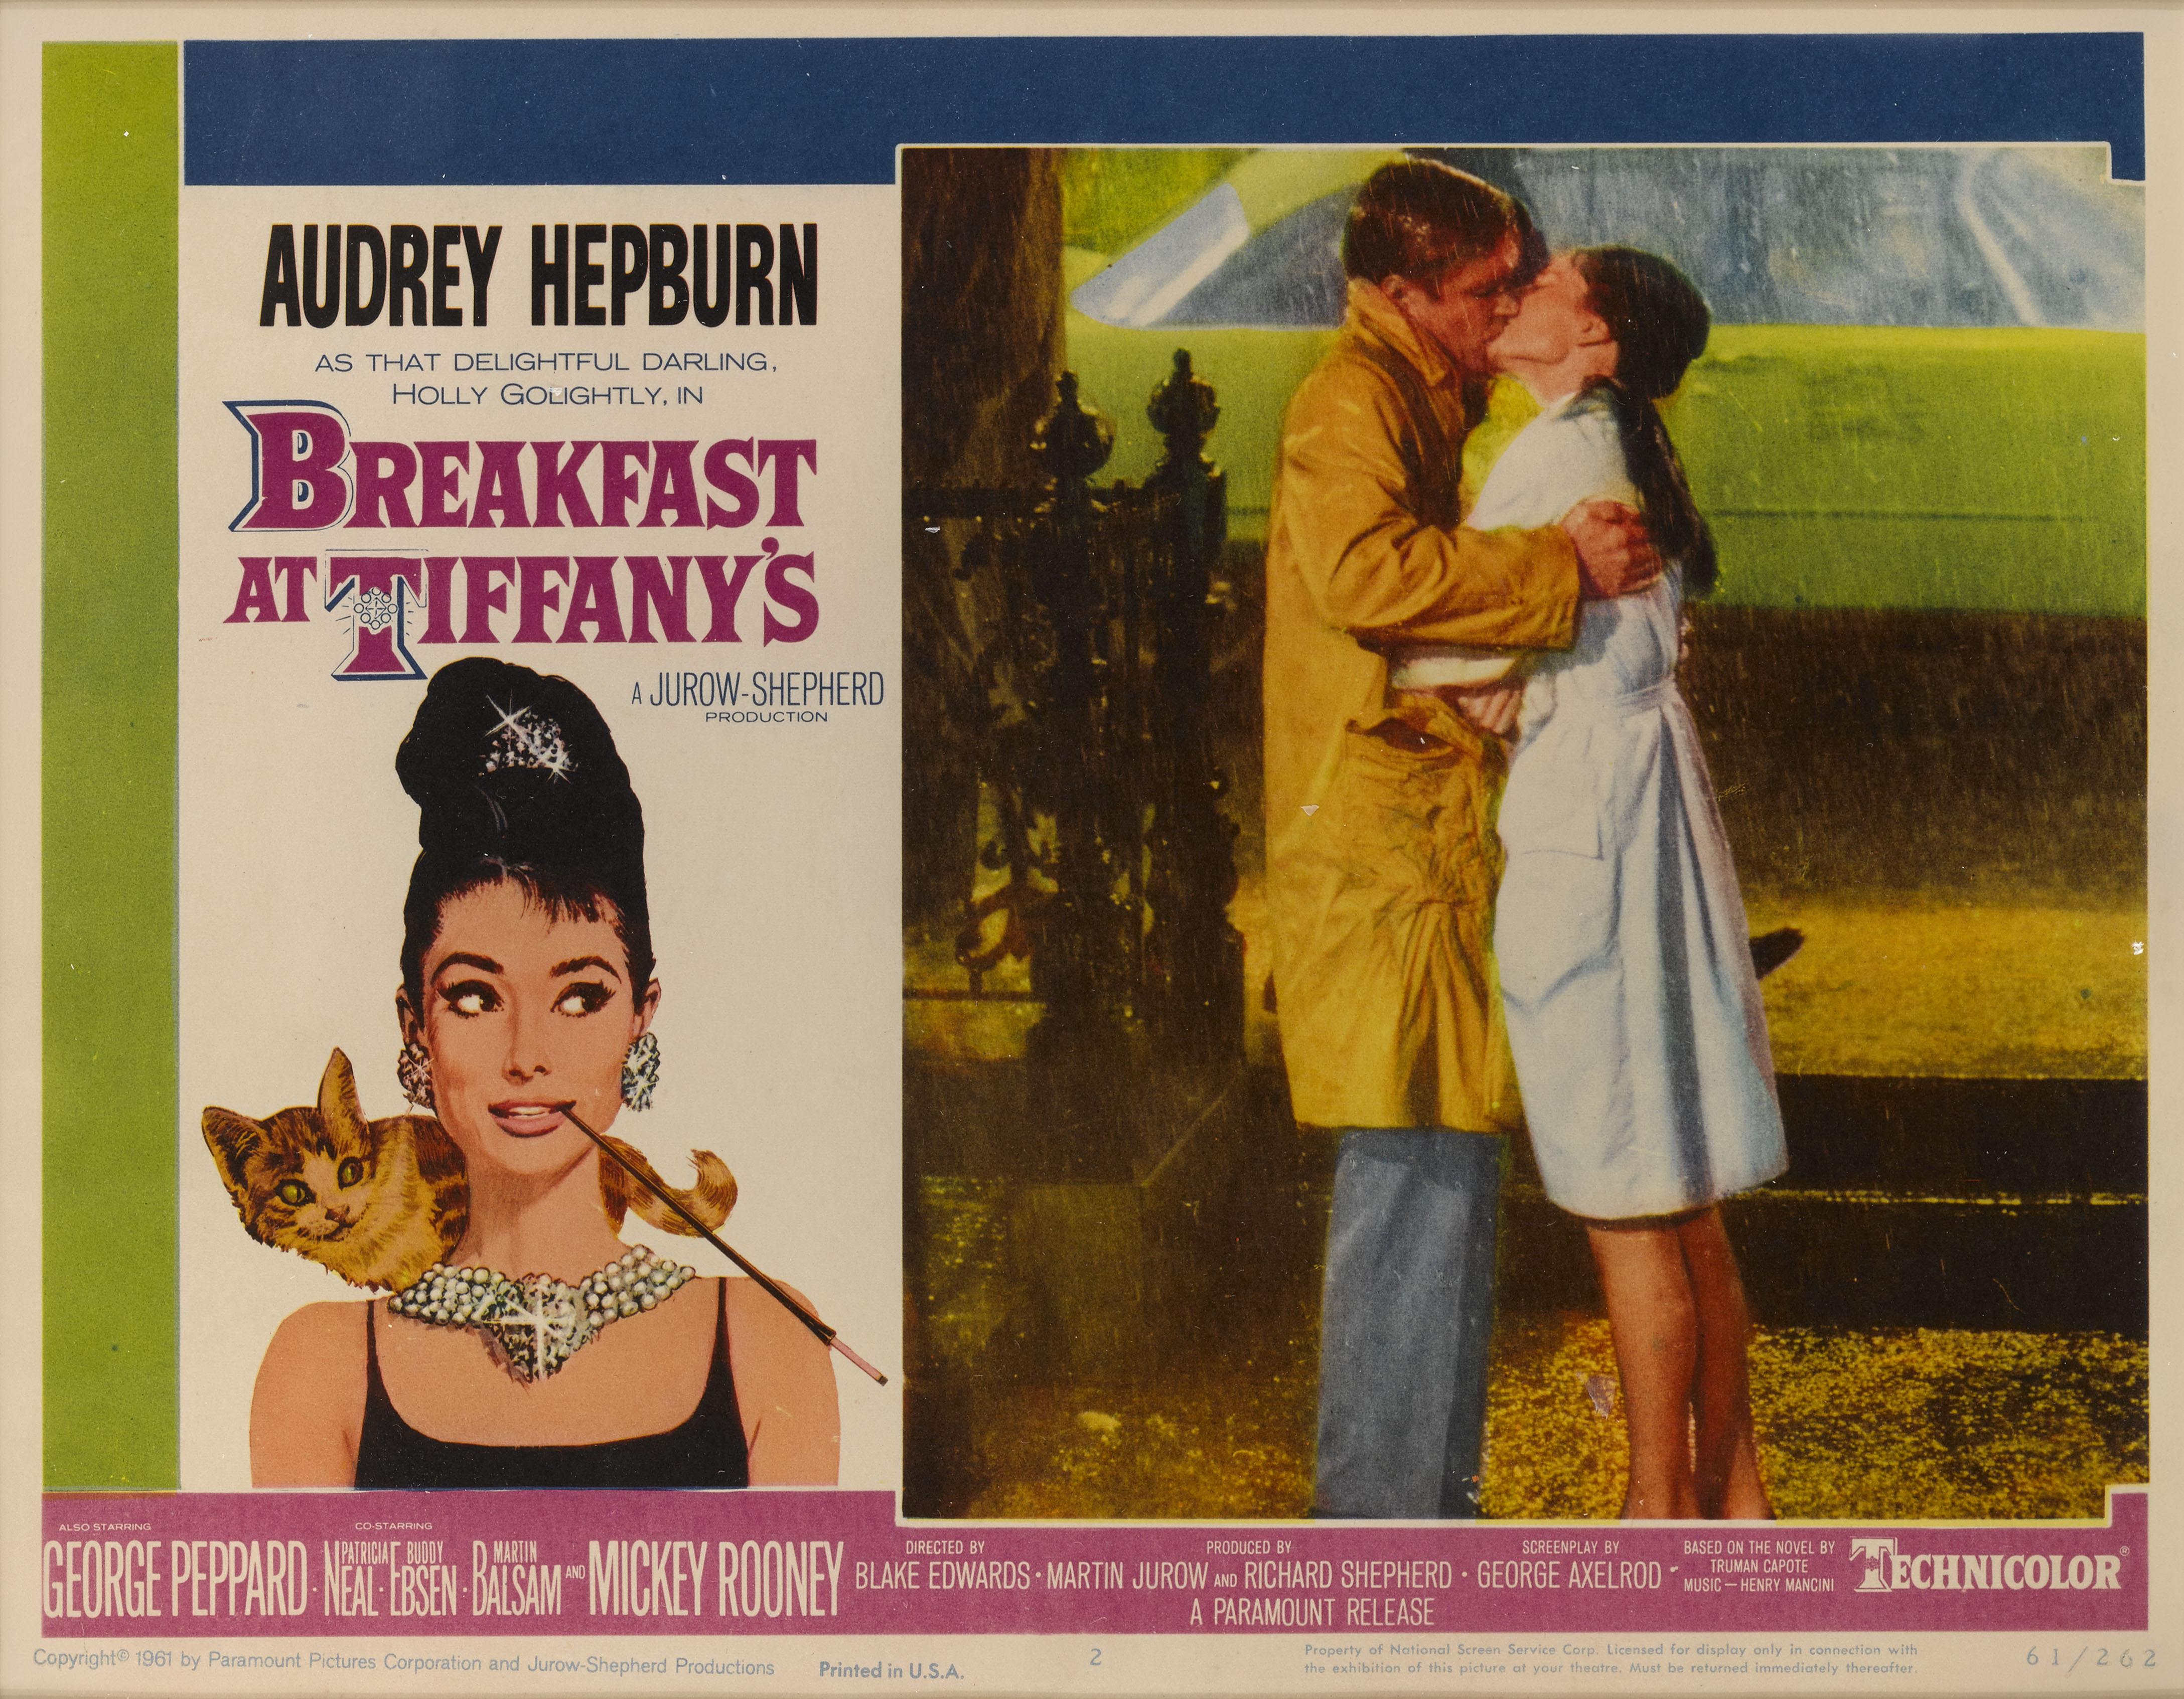 Original US Lobby card number 2 designed for the legendary 1961 Audrey Hepburn Comedy, Romance.
This film was directed by Blake Edwards, and stars Audrey Hepburn and George Peppard. This is undoubtedly Hepburn's most famous and iconic role.
This